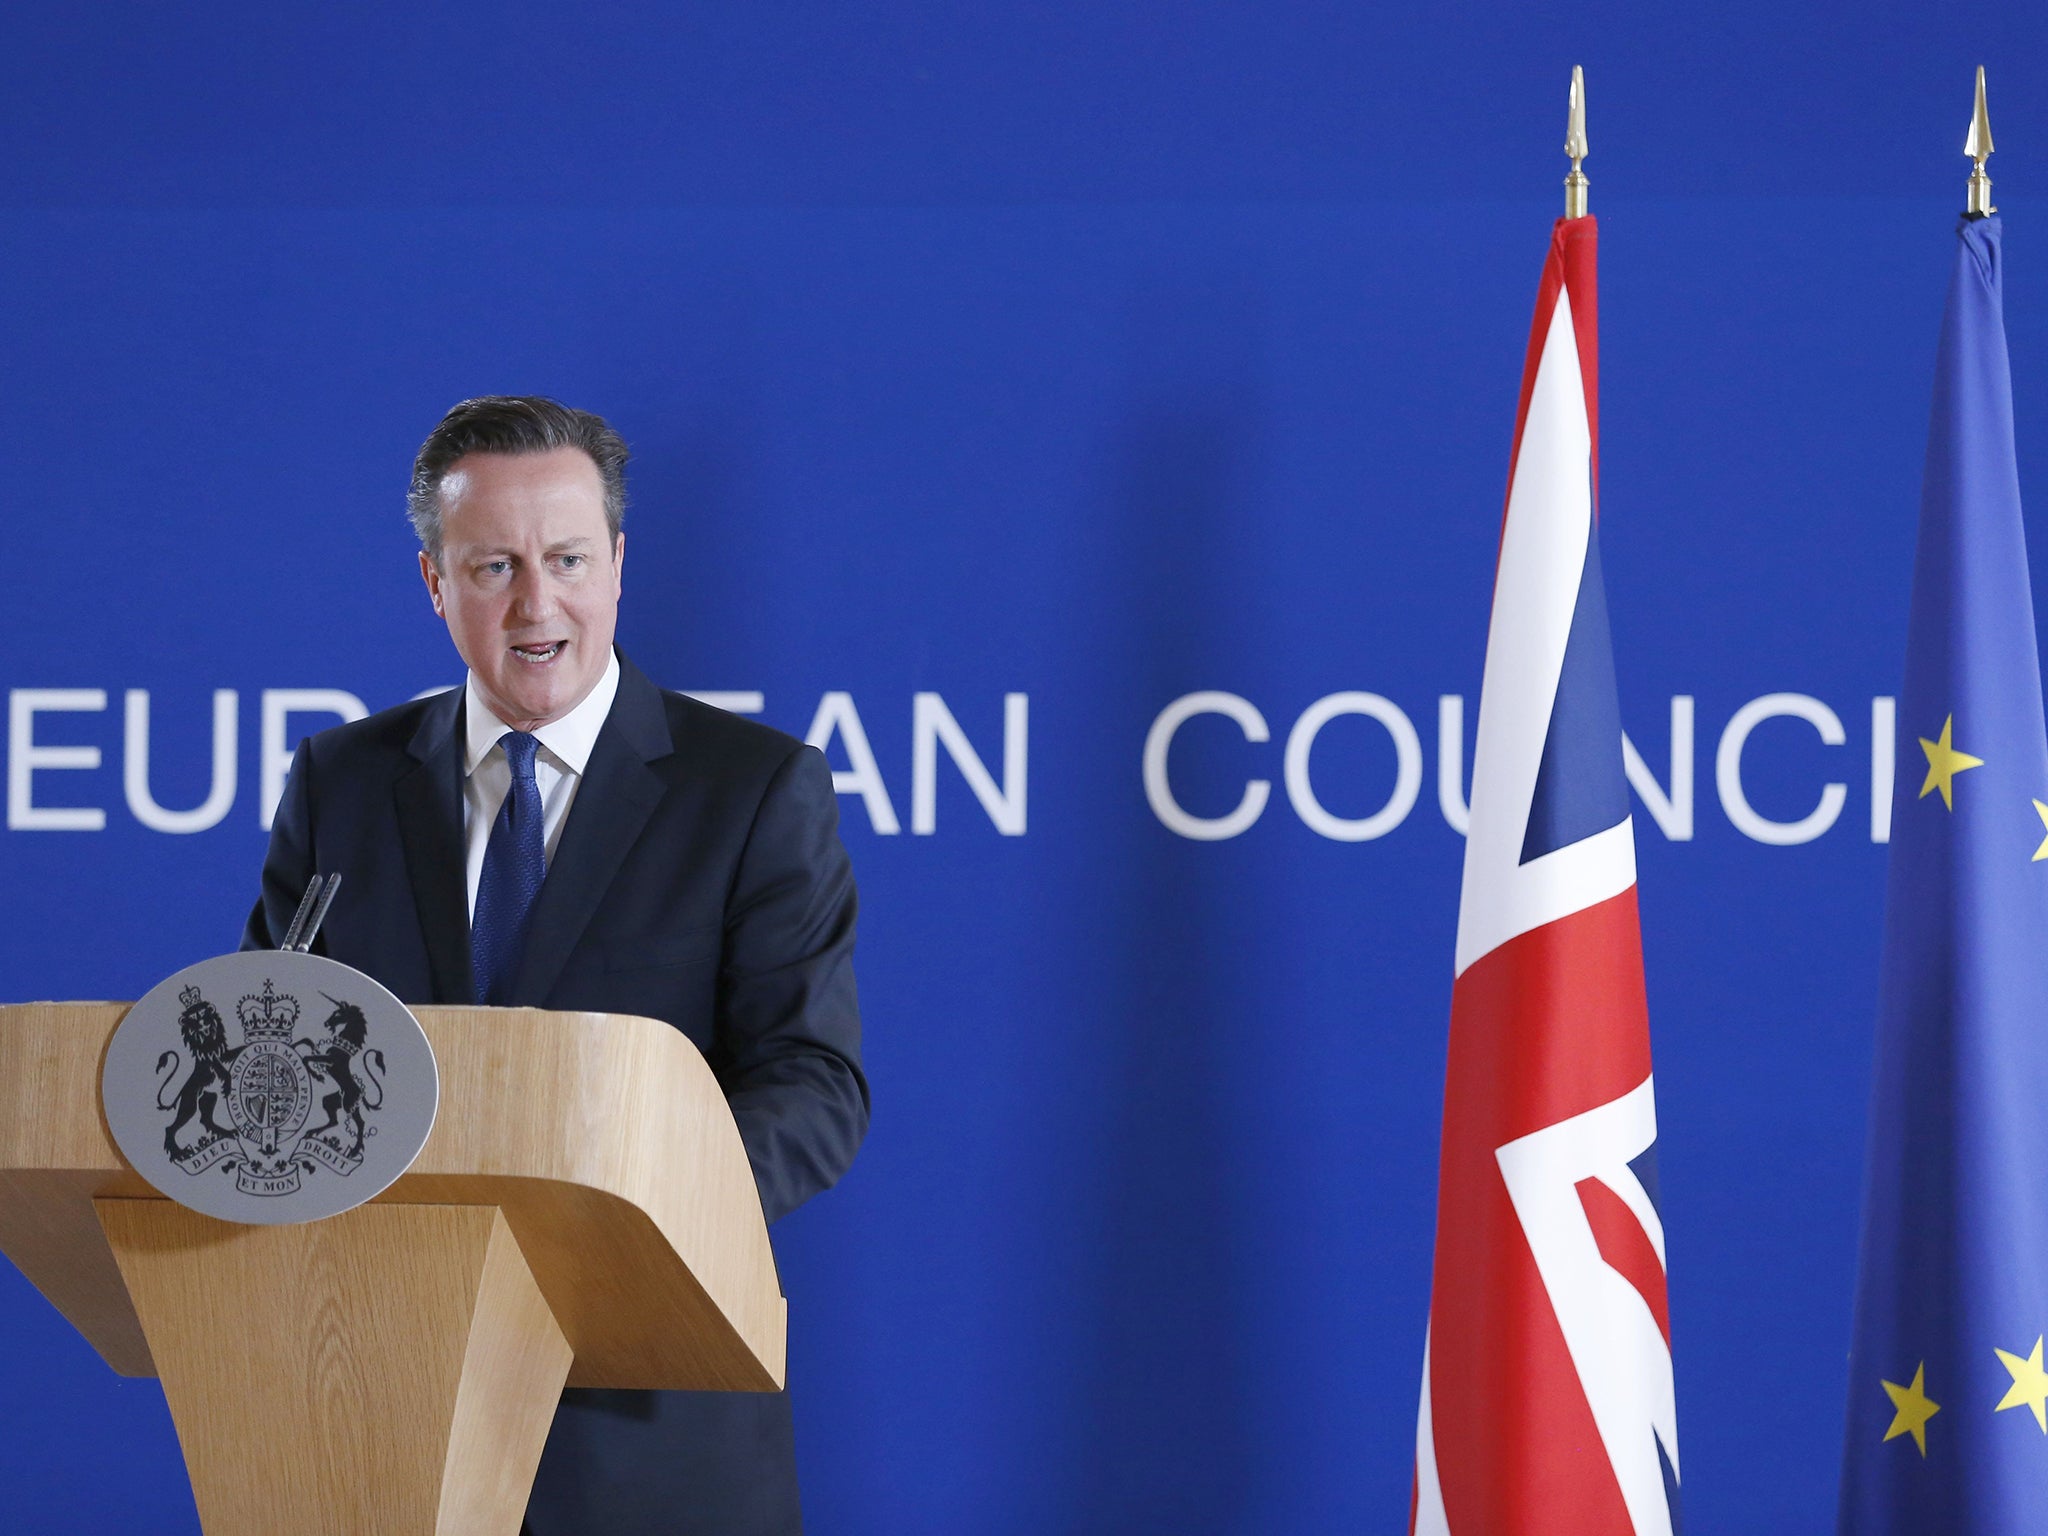 David Cameron has agreed a deal in Brussels ready for the British people to vote on June 23.